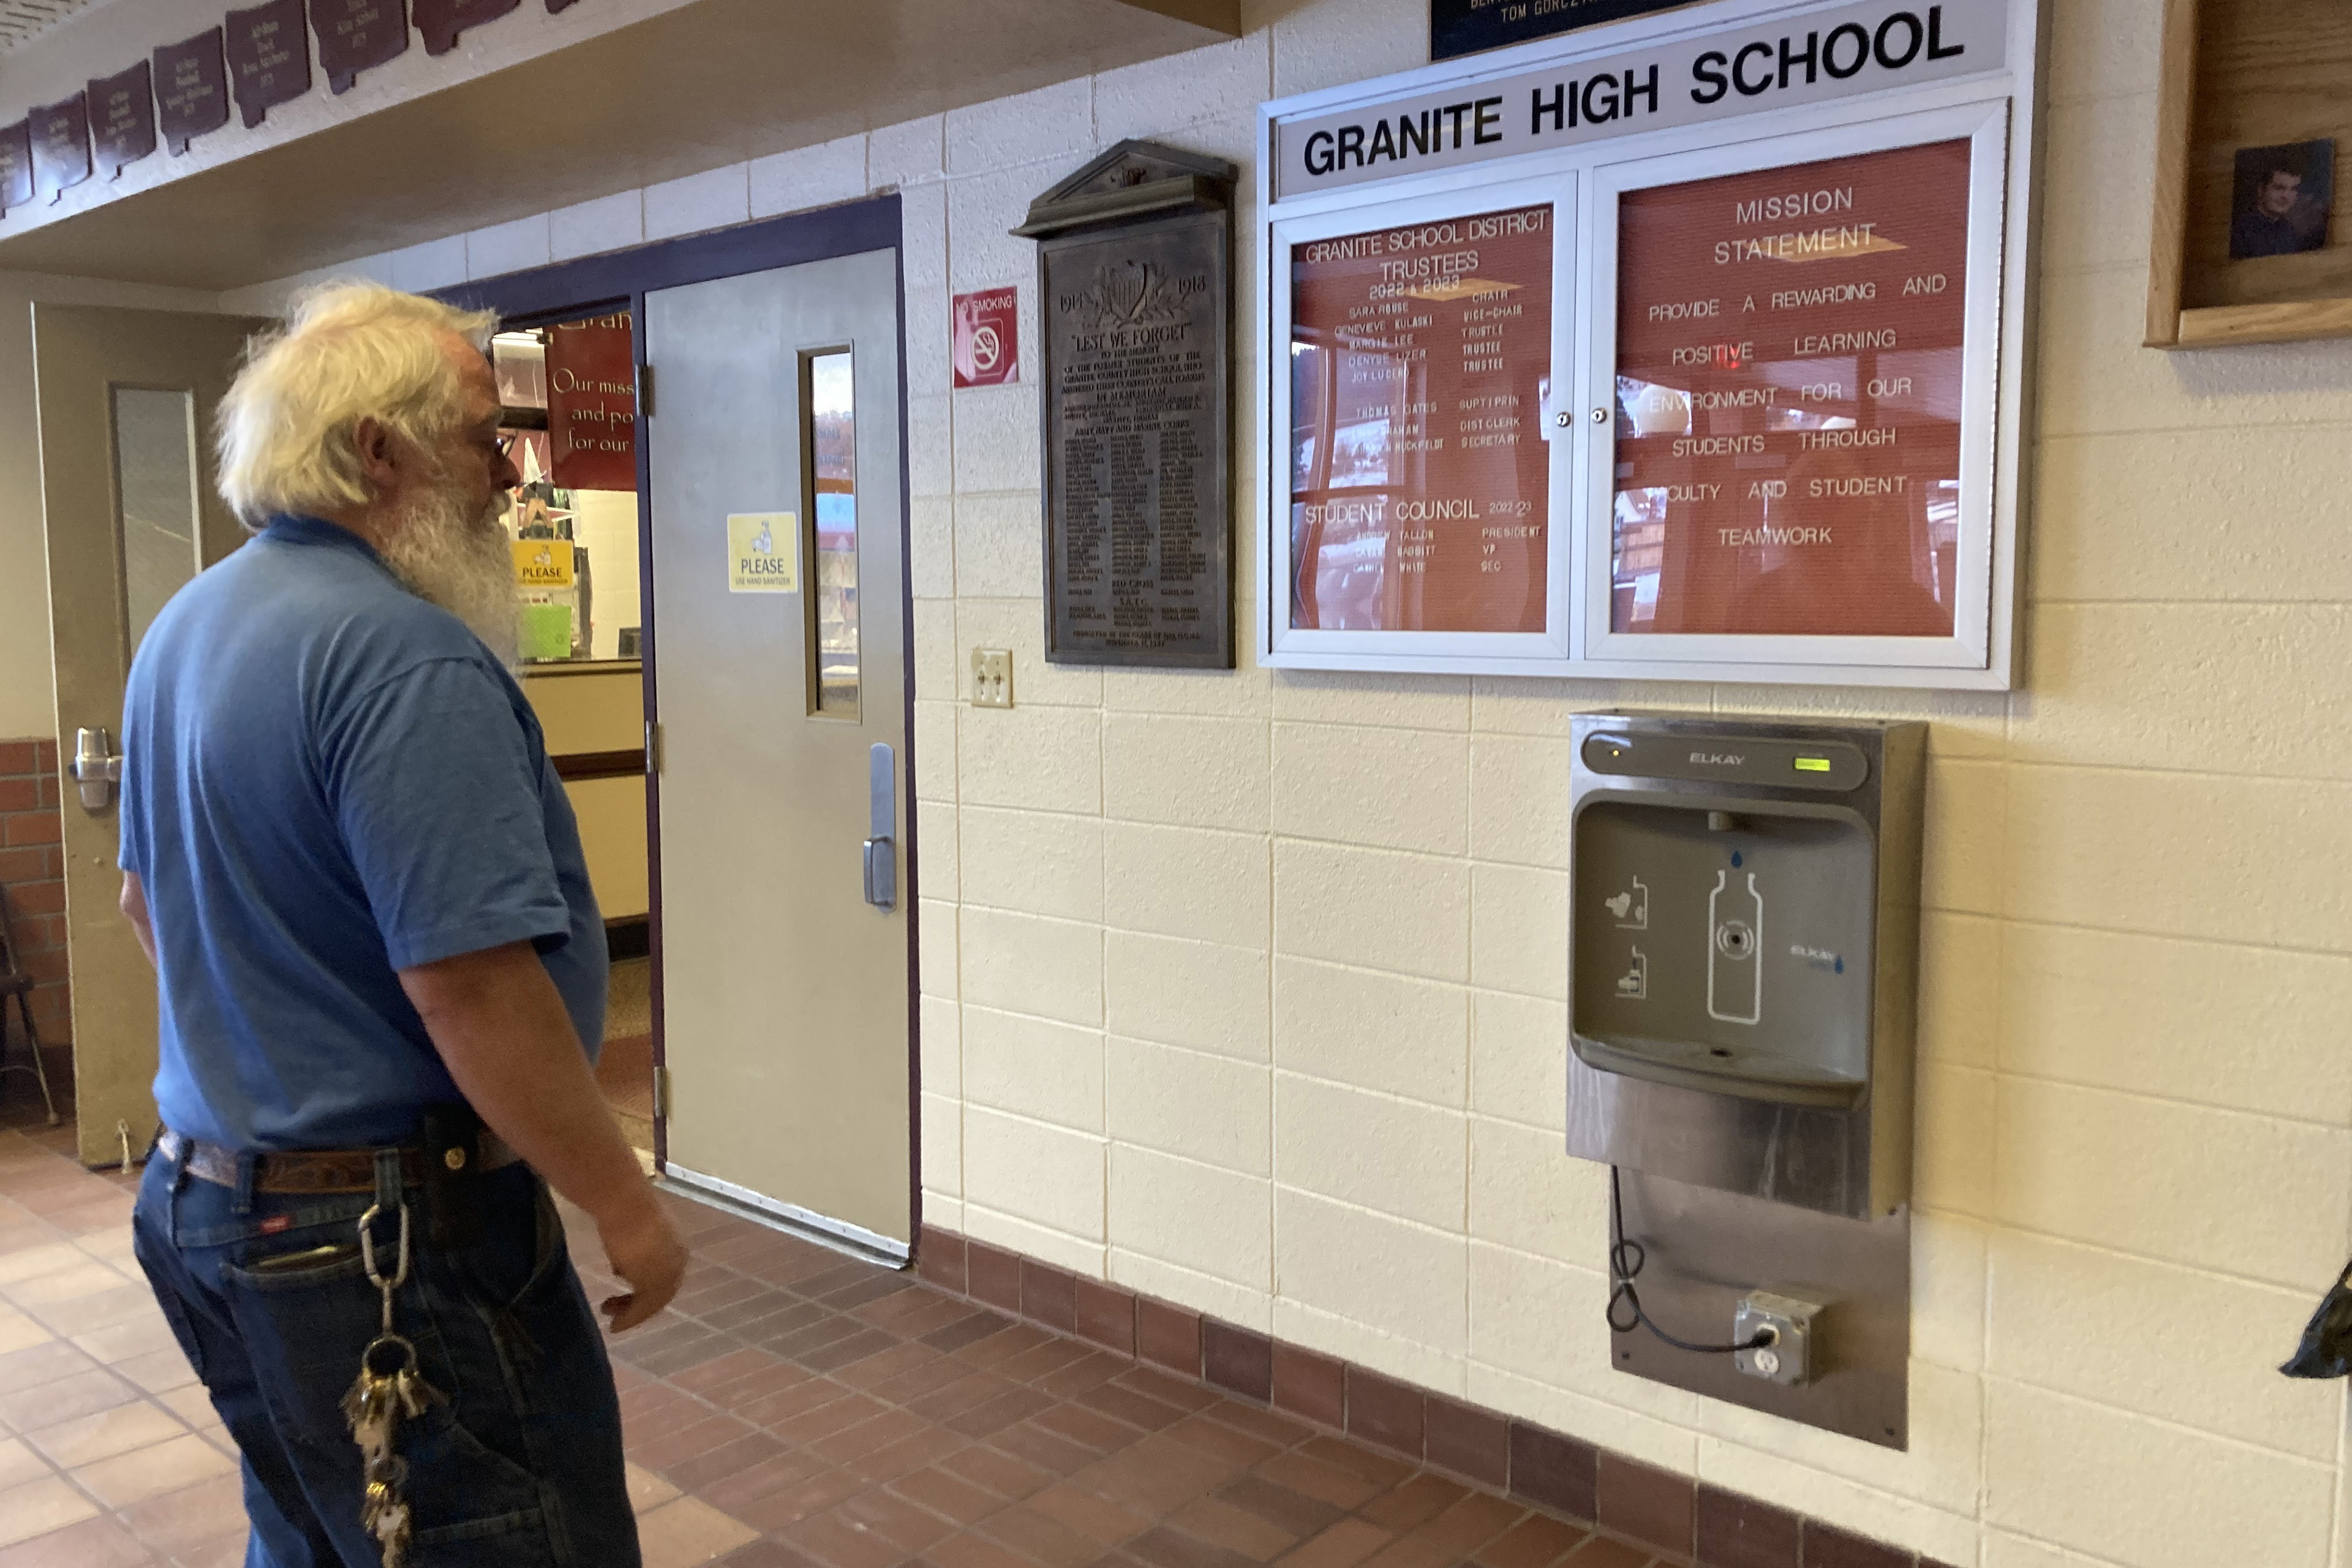 Chris Cornelius stands in front of the filtered water bottle station in the school hallway.